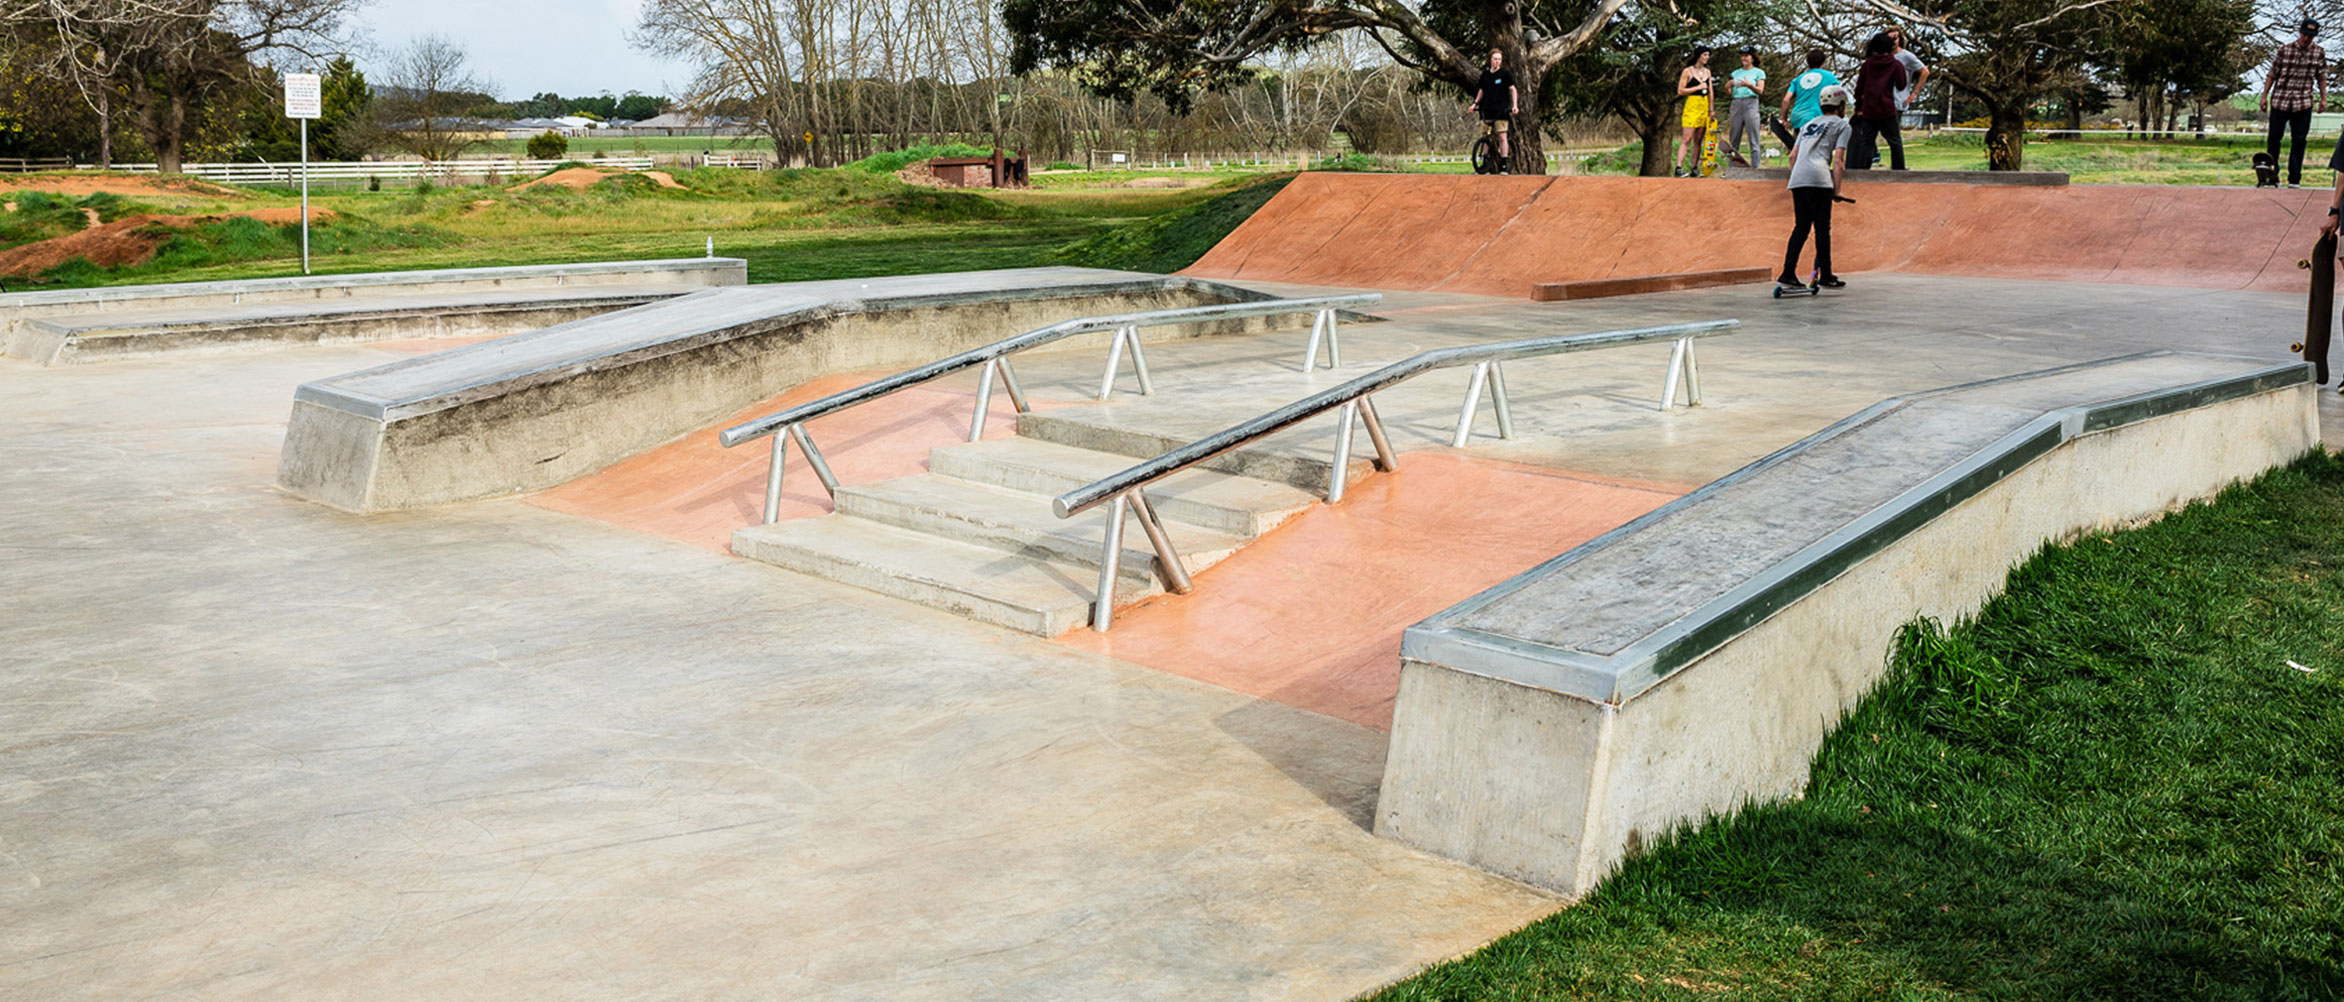 Lancefield skate park rails, hubbba and stairs